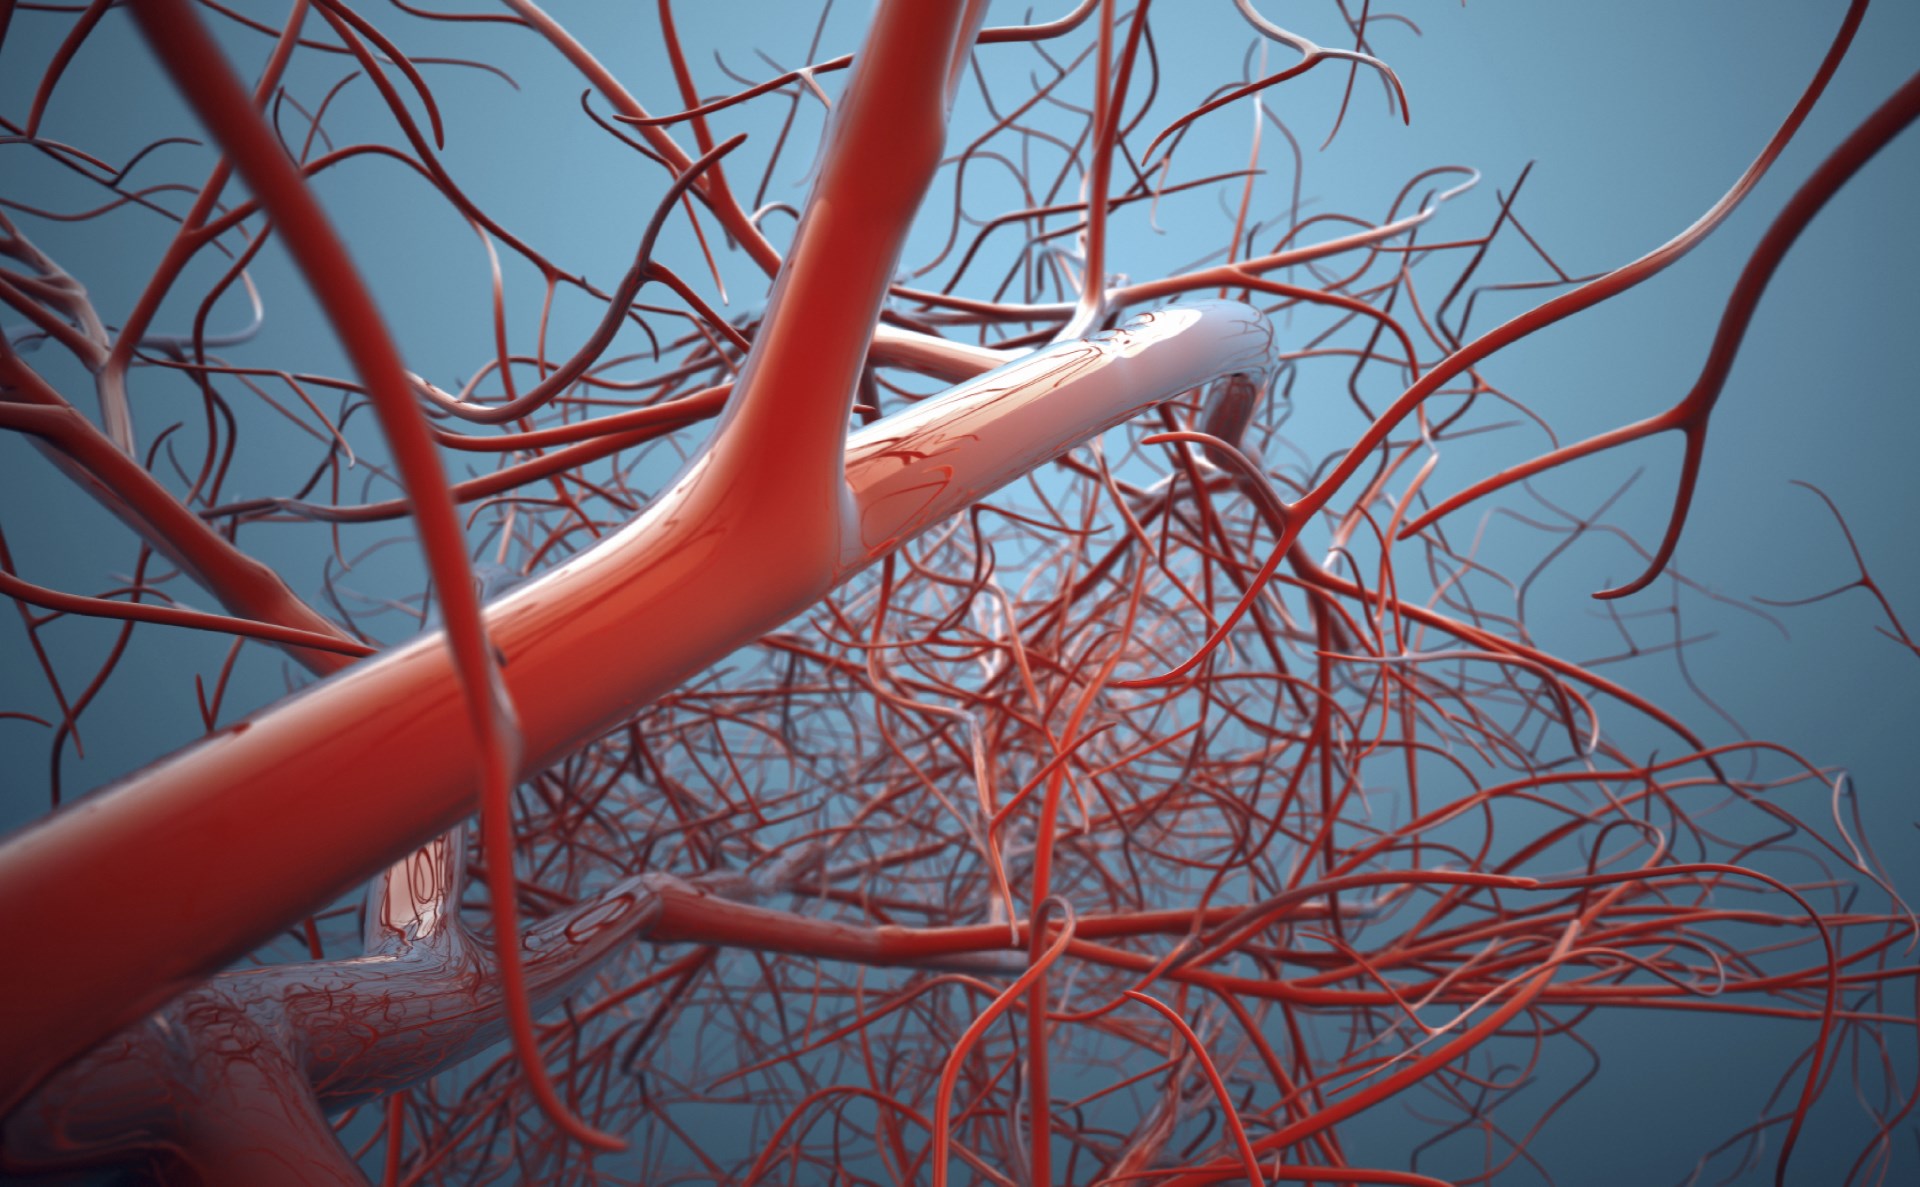 You have 160 thousand km of blood vessels